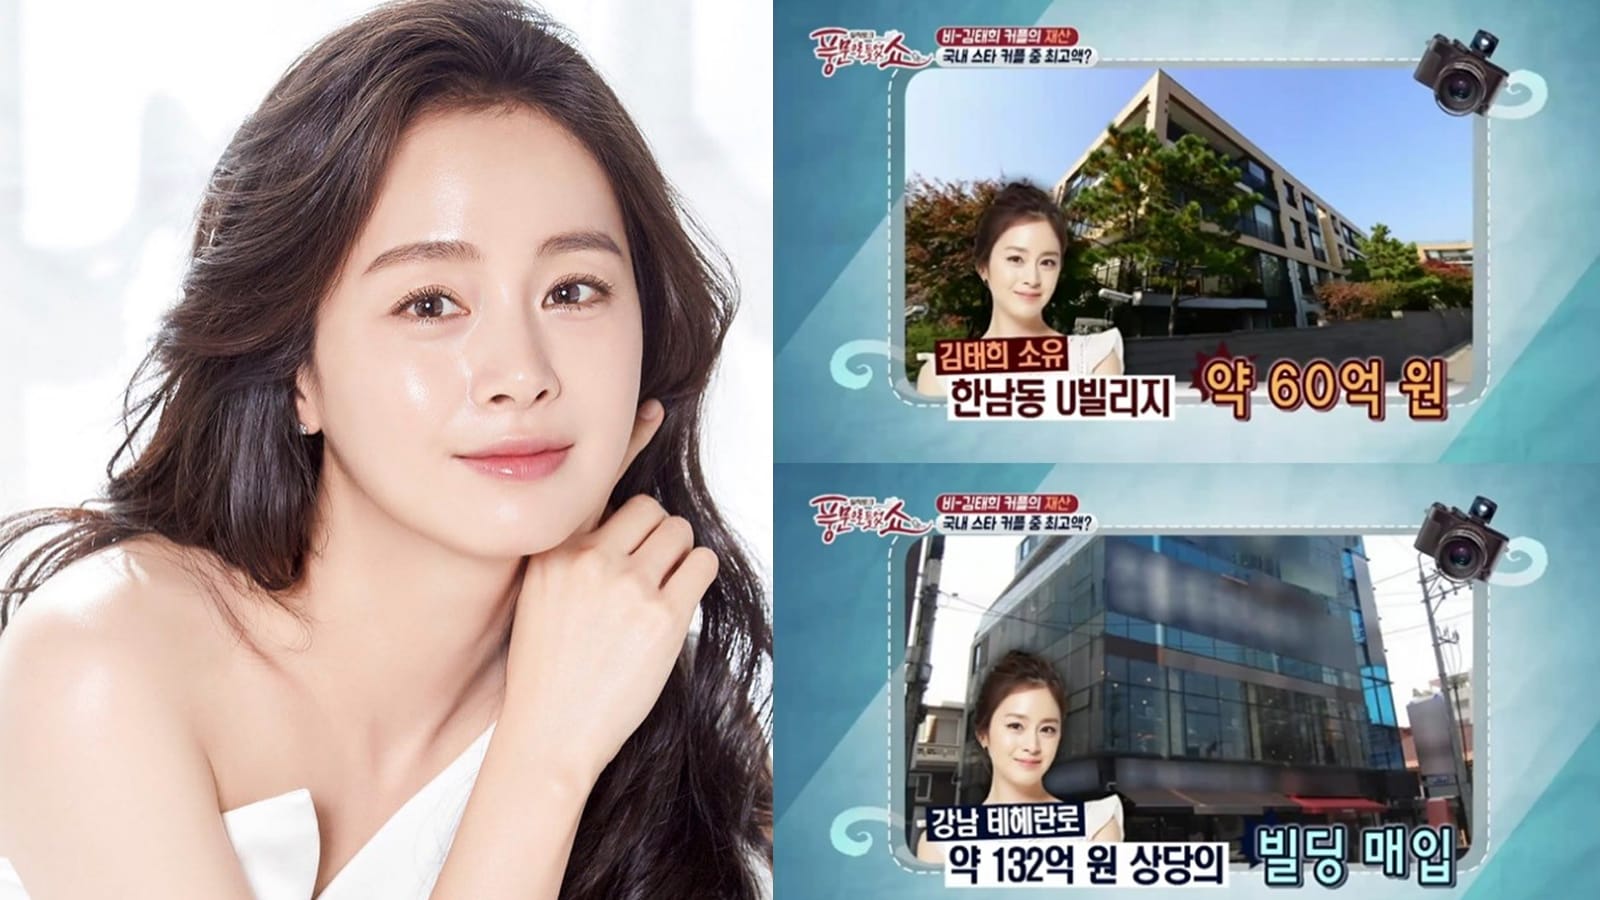 Kim Tae Hee Reportedly Exploited A Loophole In The Law To Evade Over S$1mil In Real Estate Taxes